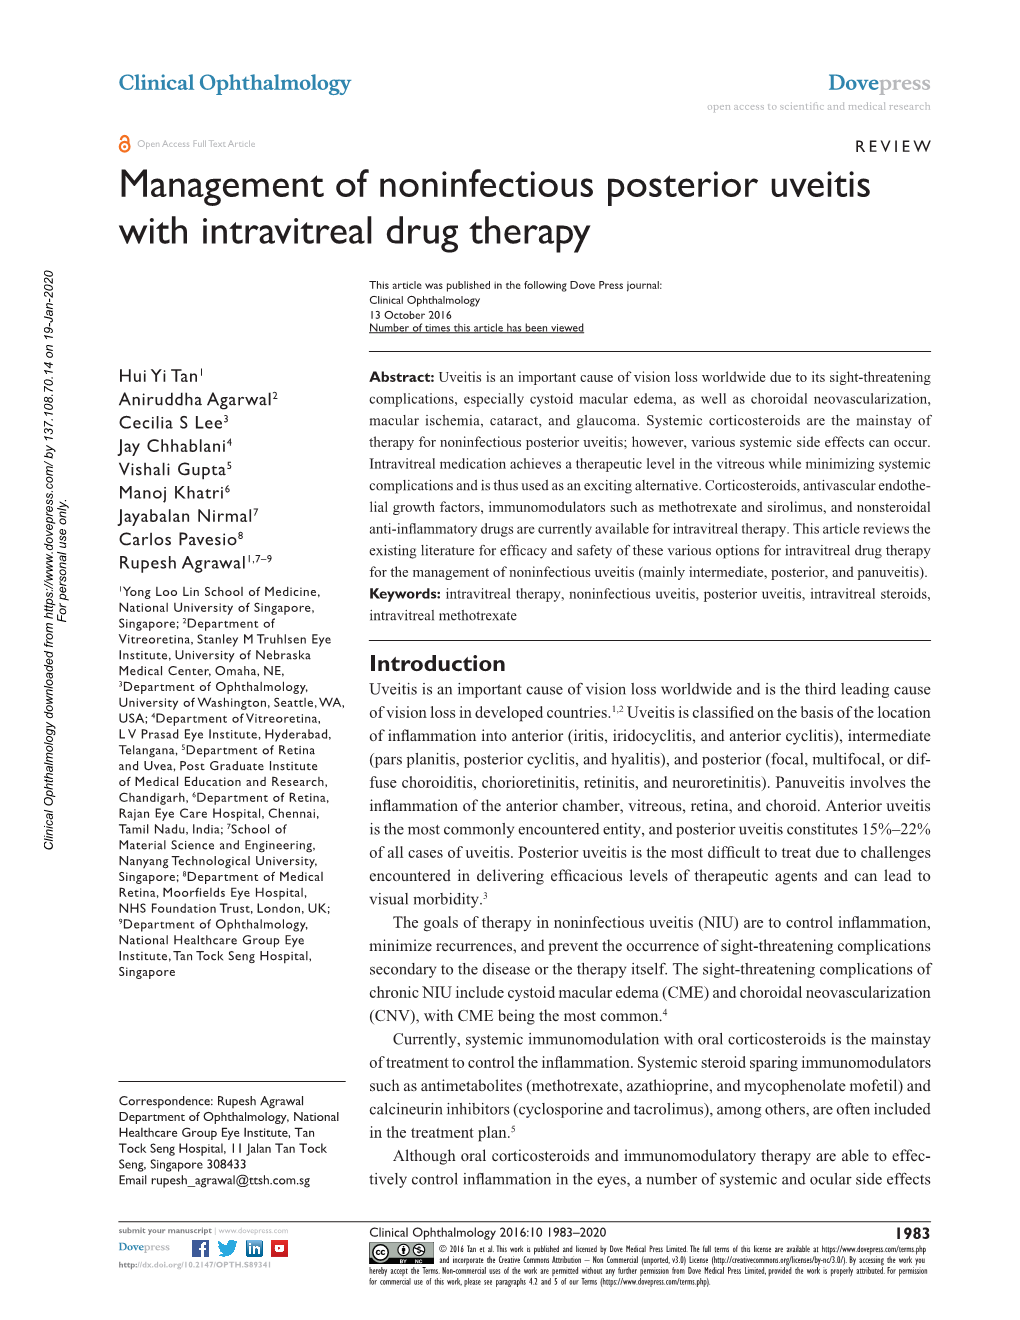 Management of Noninfectious Posterior Uveitis with Intravitreal Drug Therapy